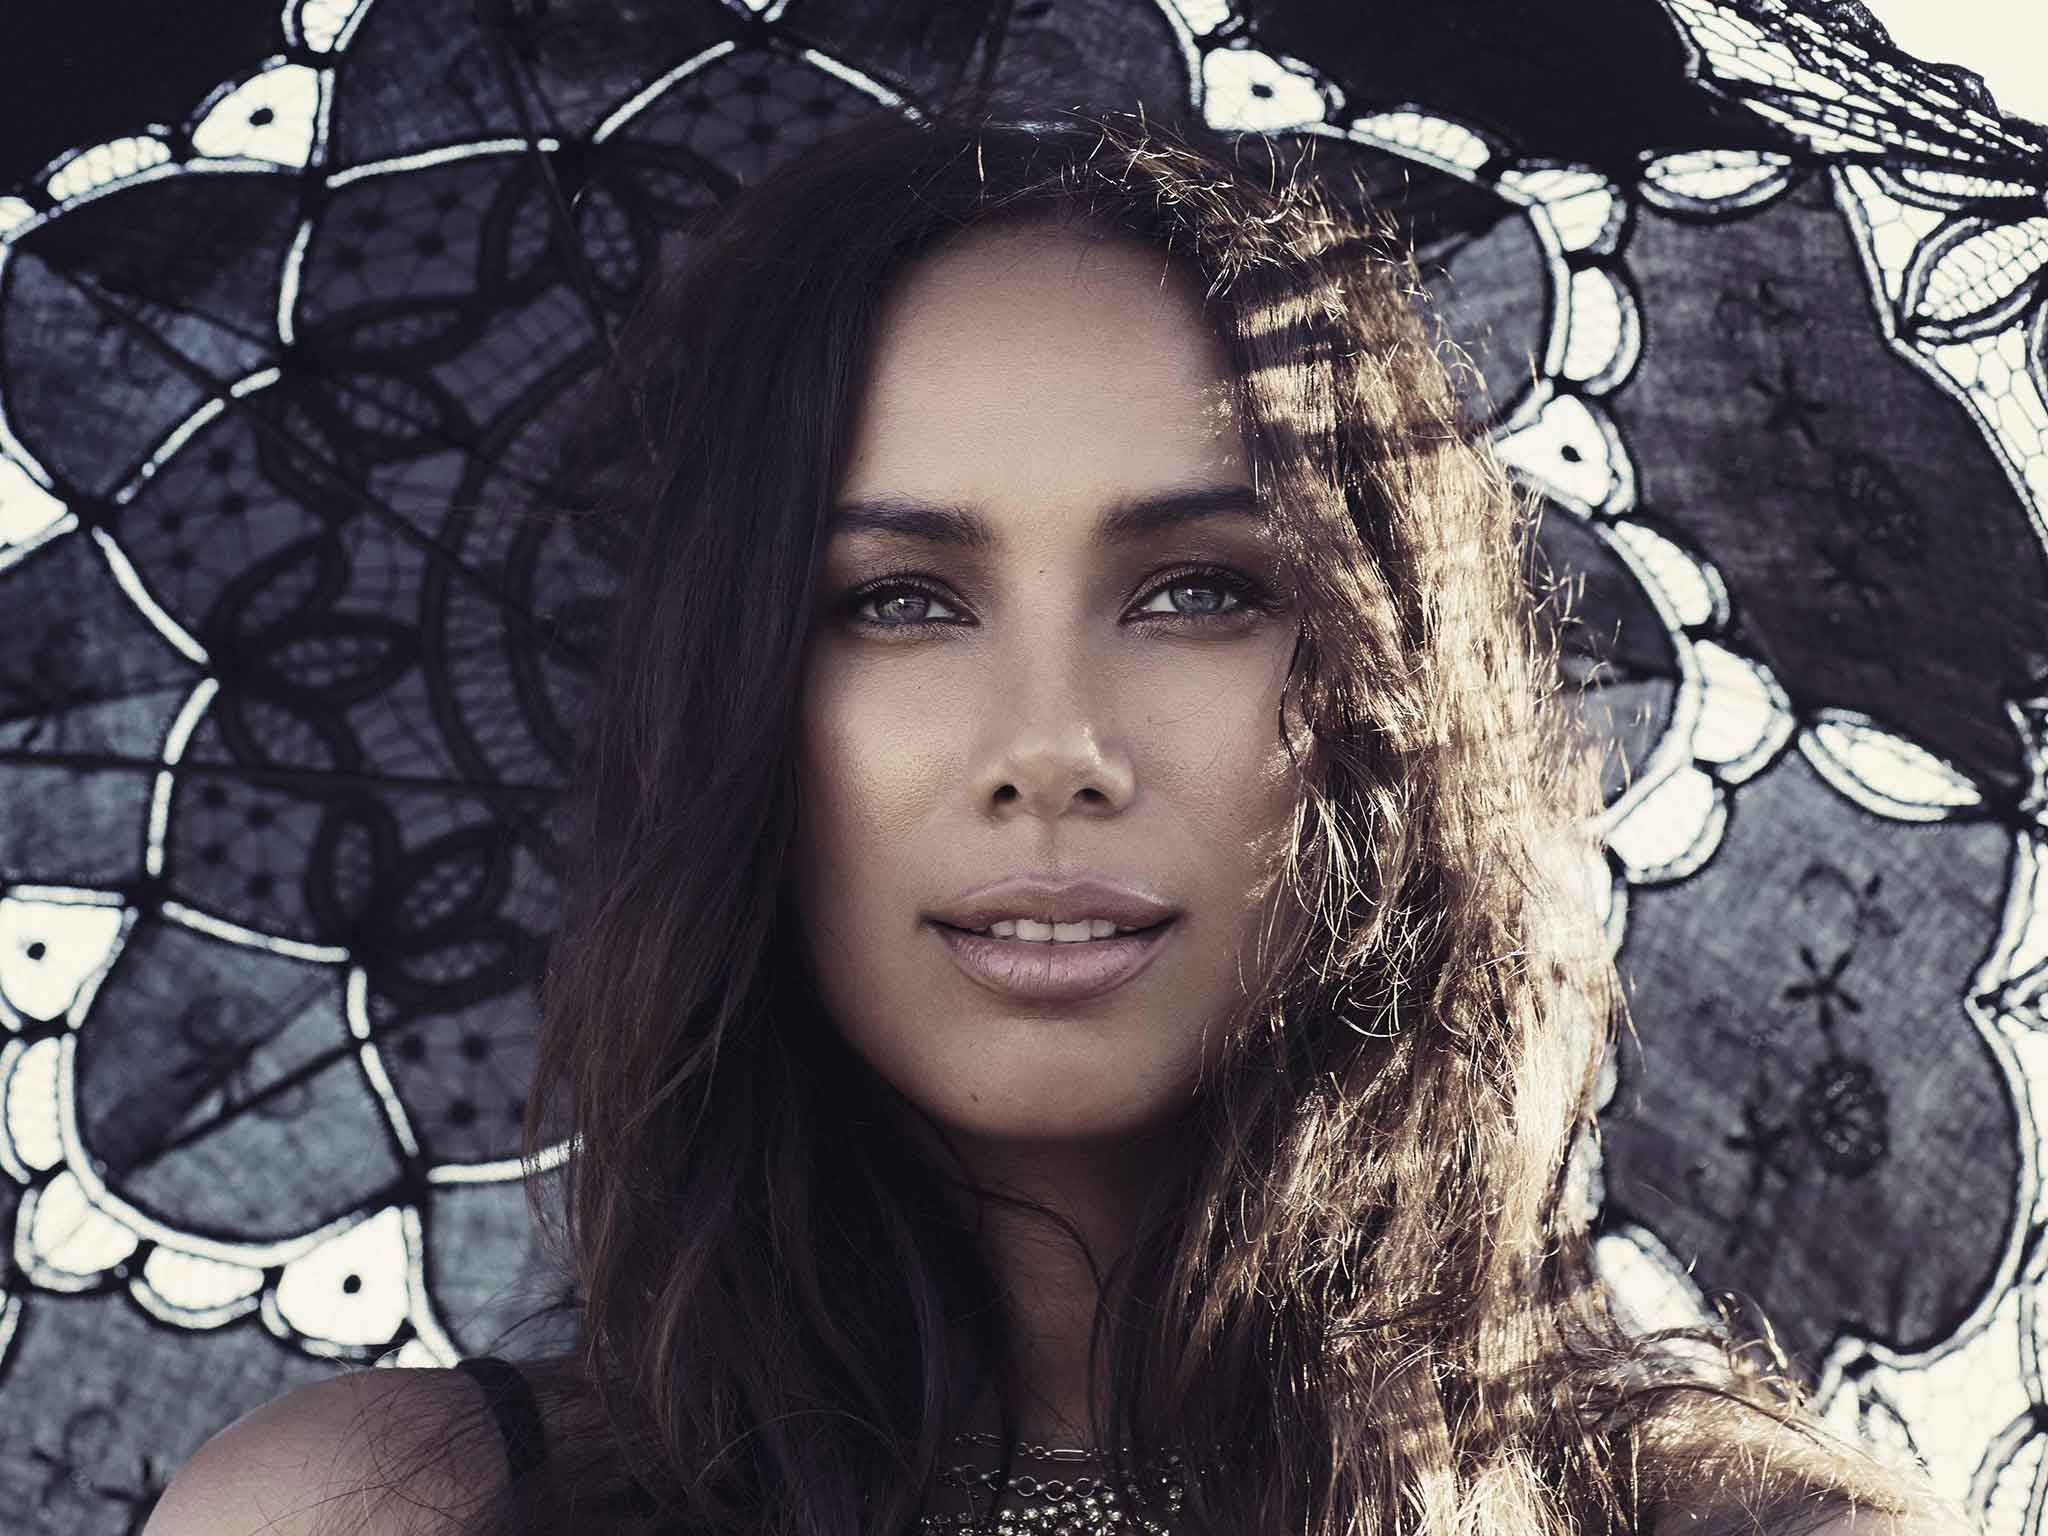 Leona Lewis's relationship with Syco came to a head when she was asked to make a covers album rather than writing and singing her own material